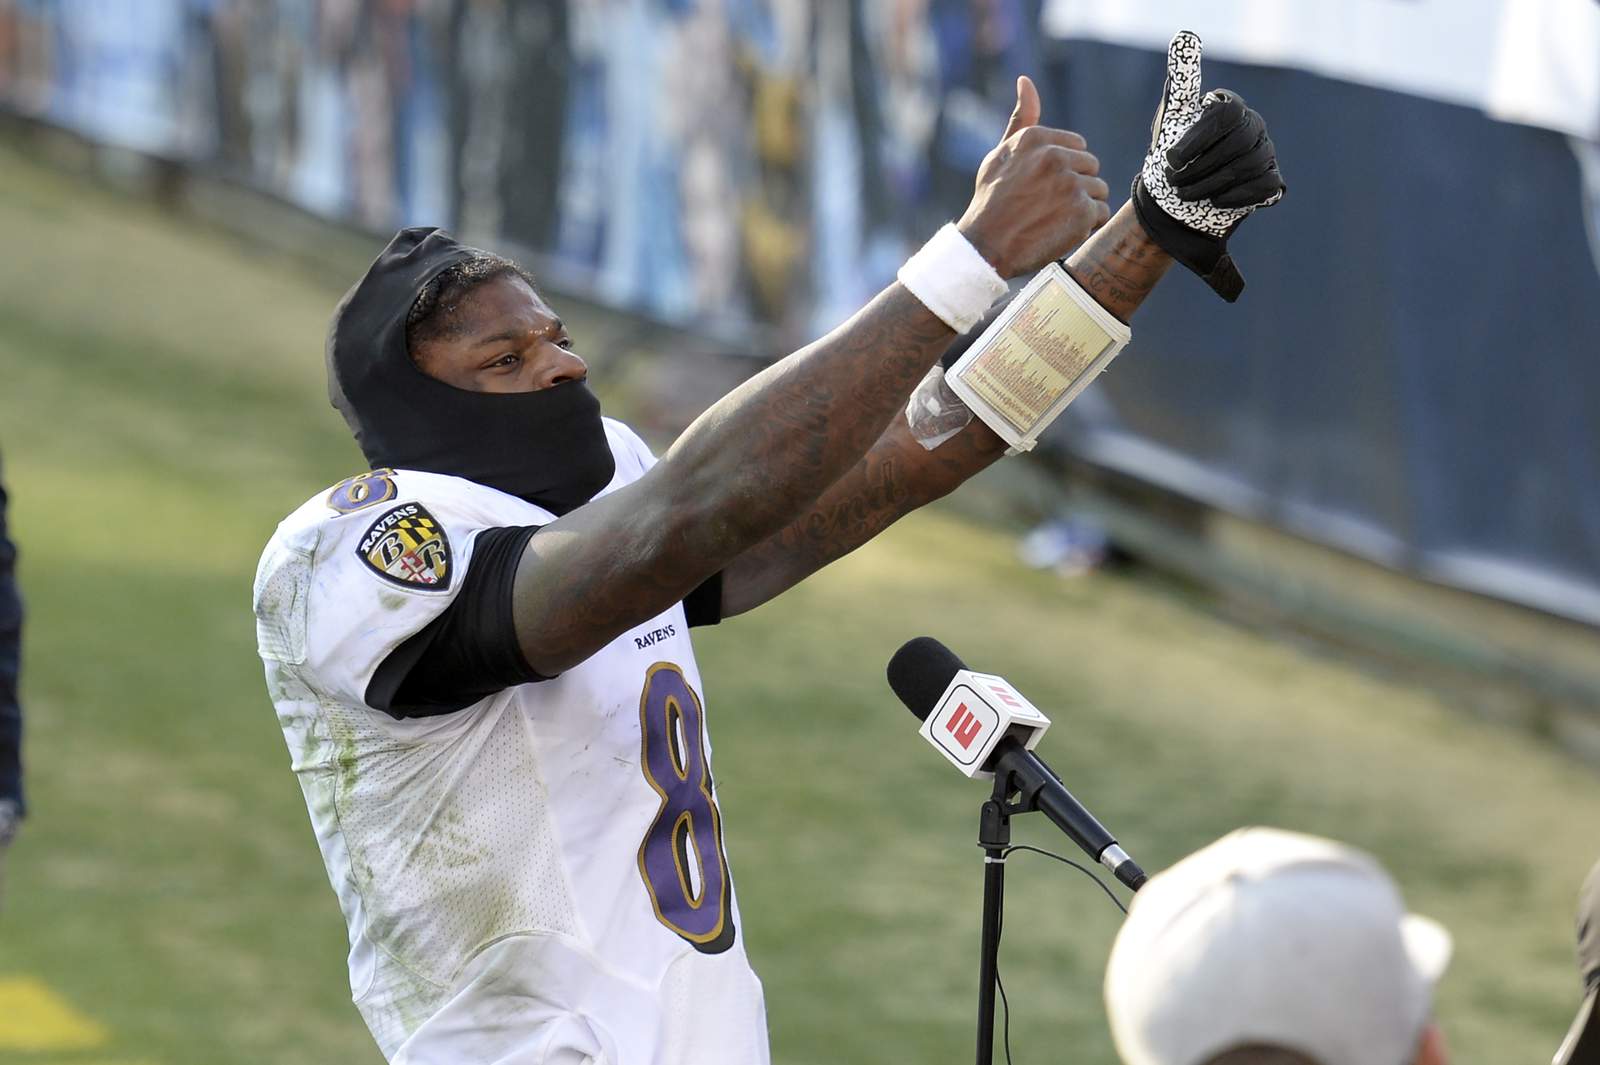 Lamar winless no more, leads Ravens to 20-13 win over Titans